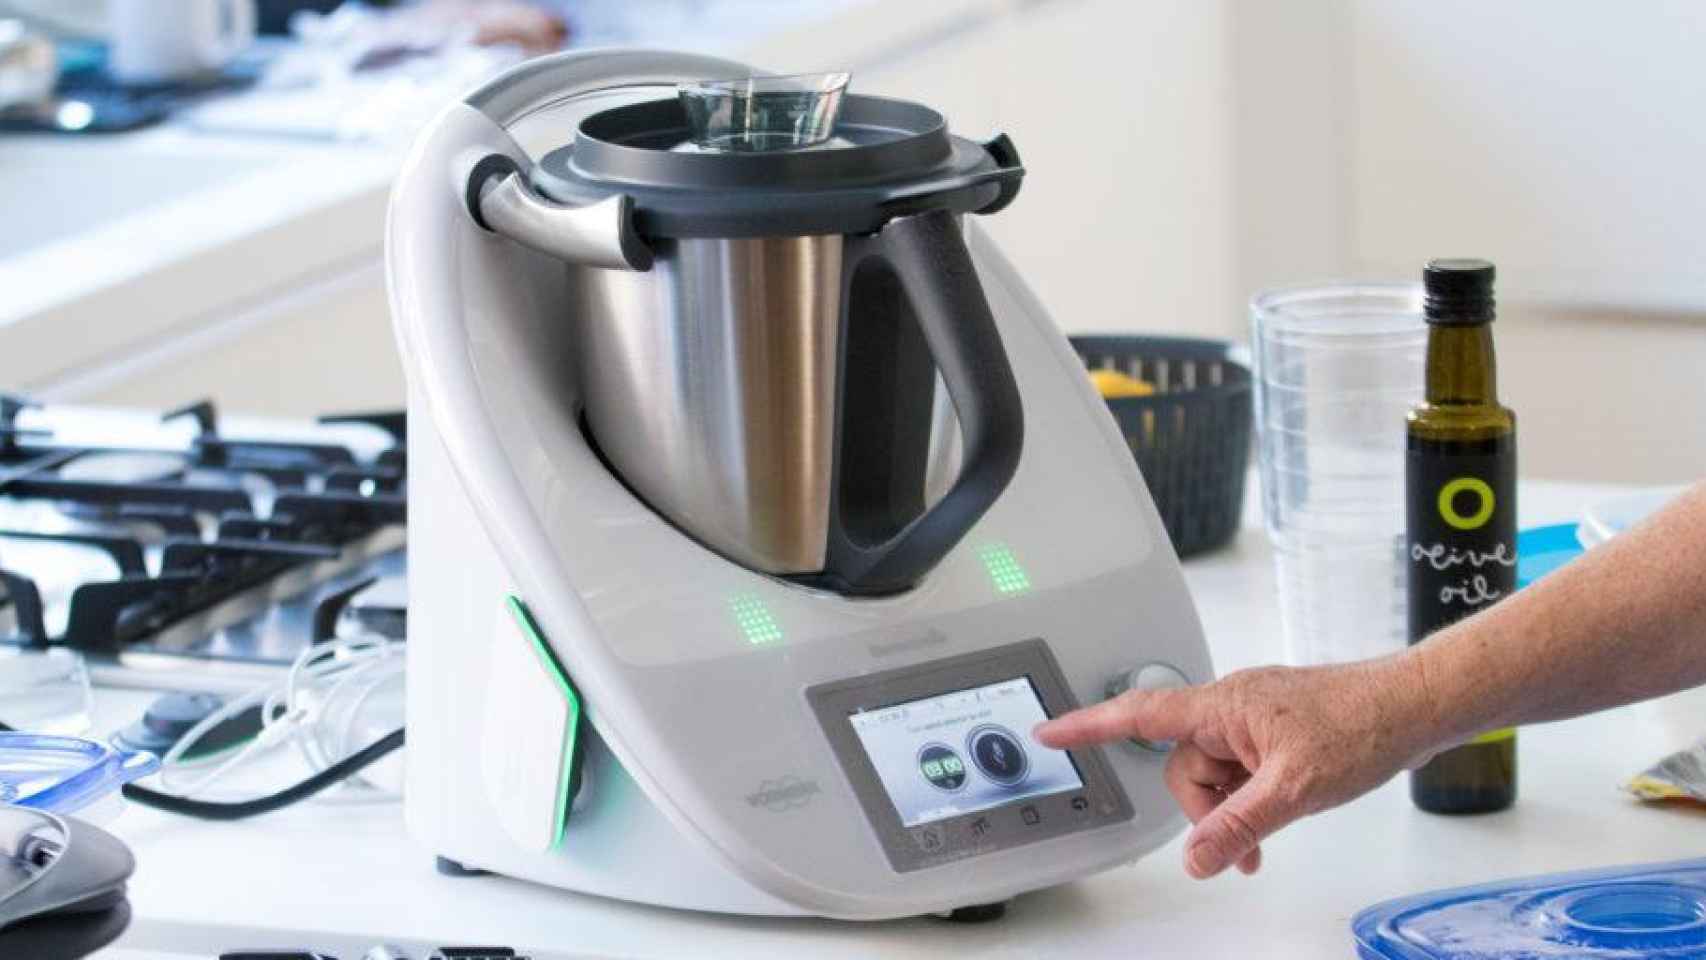 Thermomix.